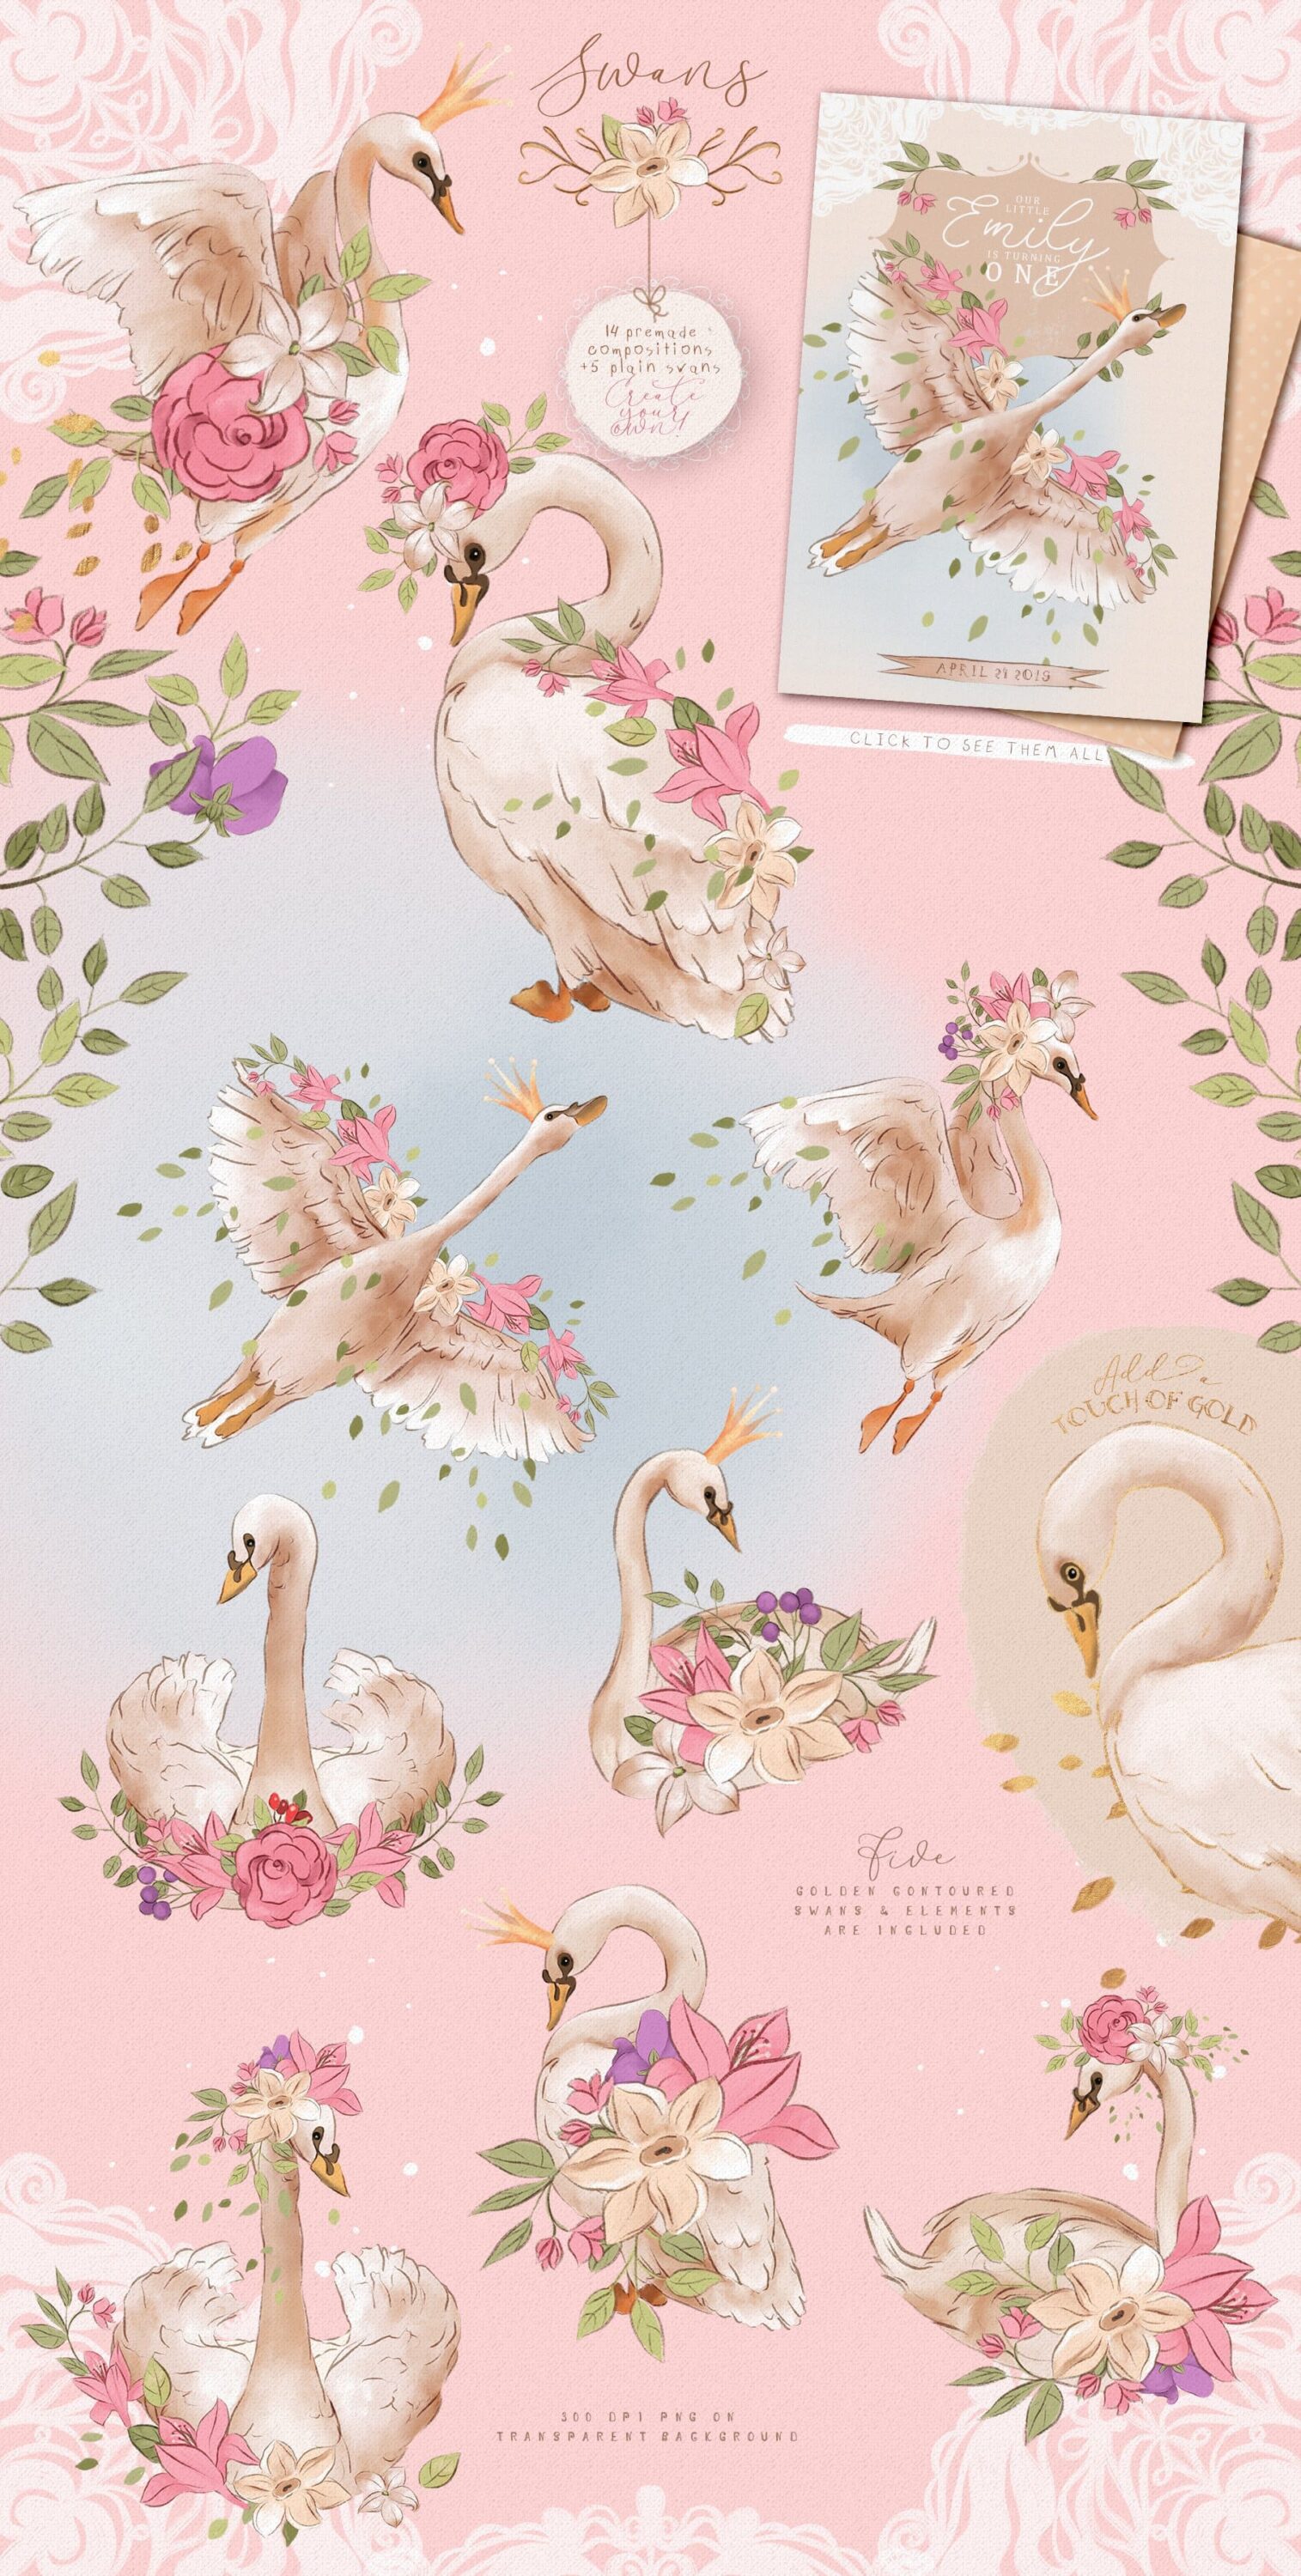 Pink delicate illustration with different princess swan conditions.